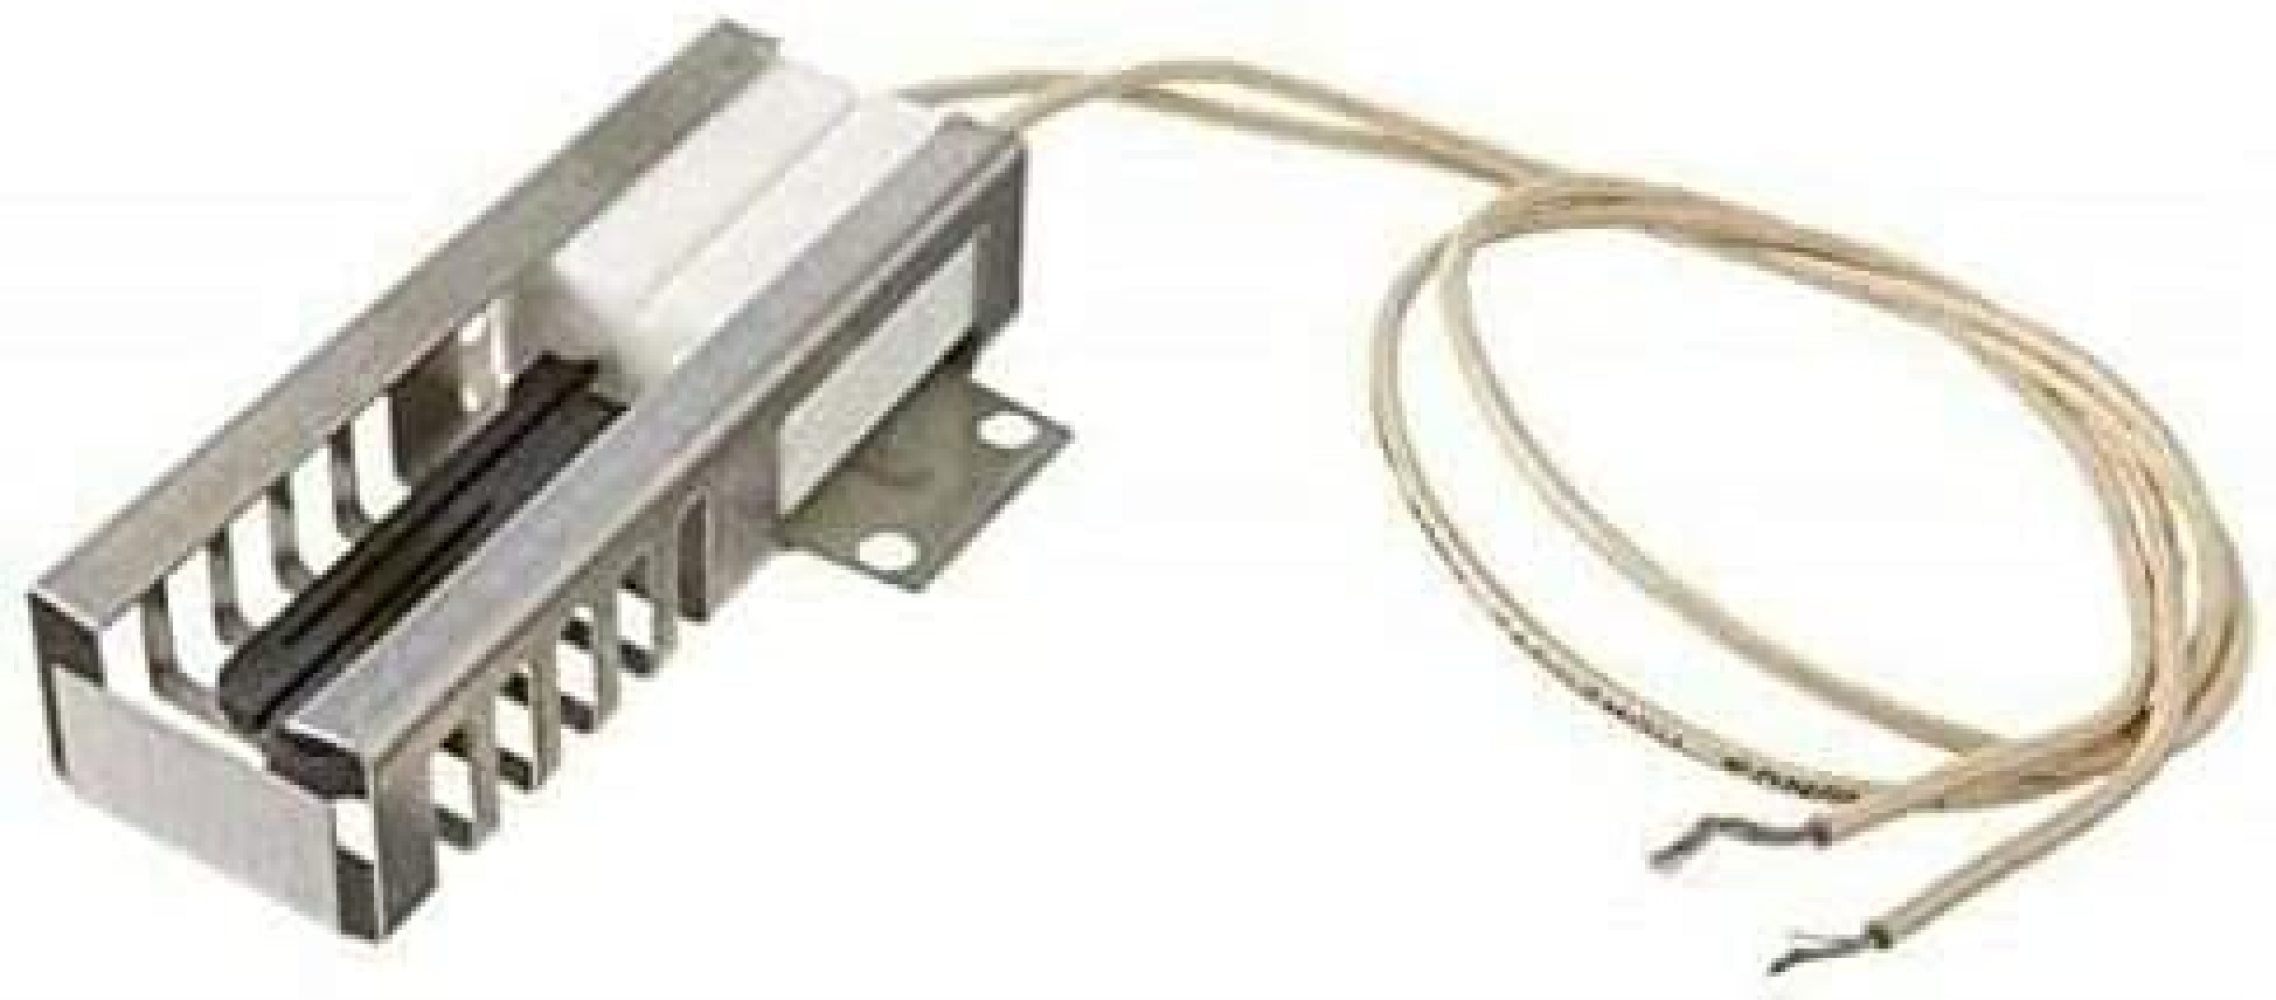 Frigidaire Electrolux Kenmore Tappan Flat Oven Range Ignitor Igniter 318177710 